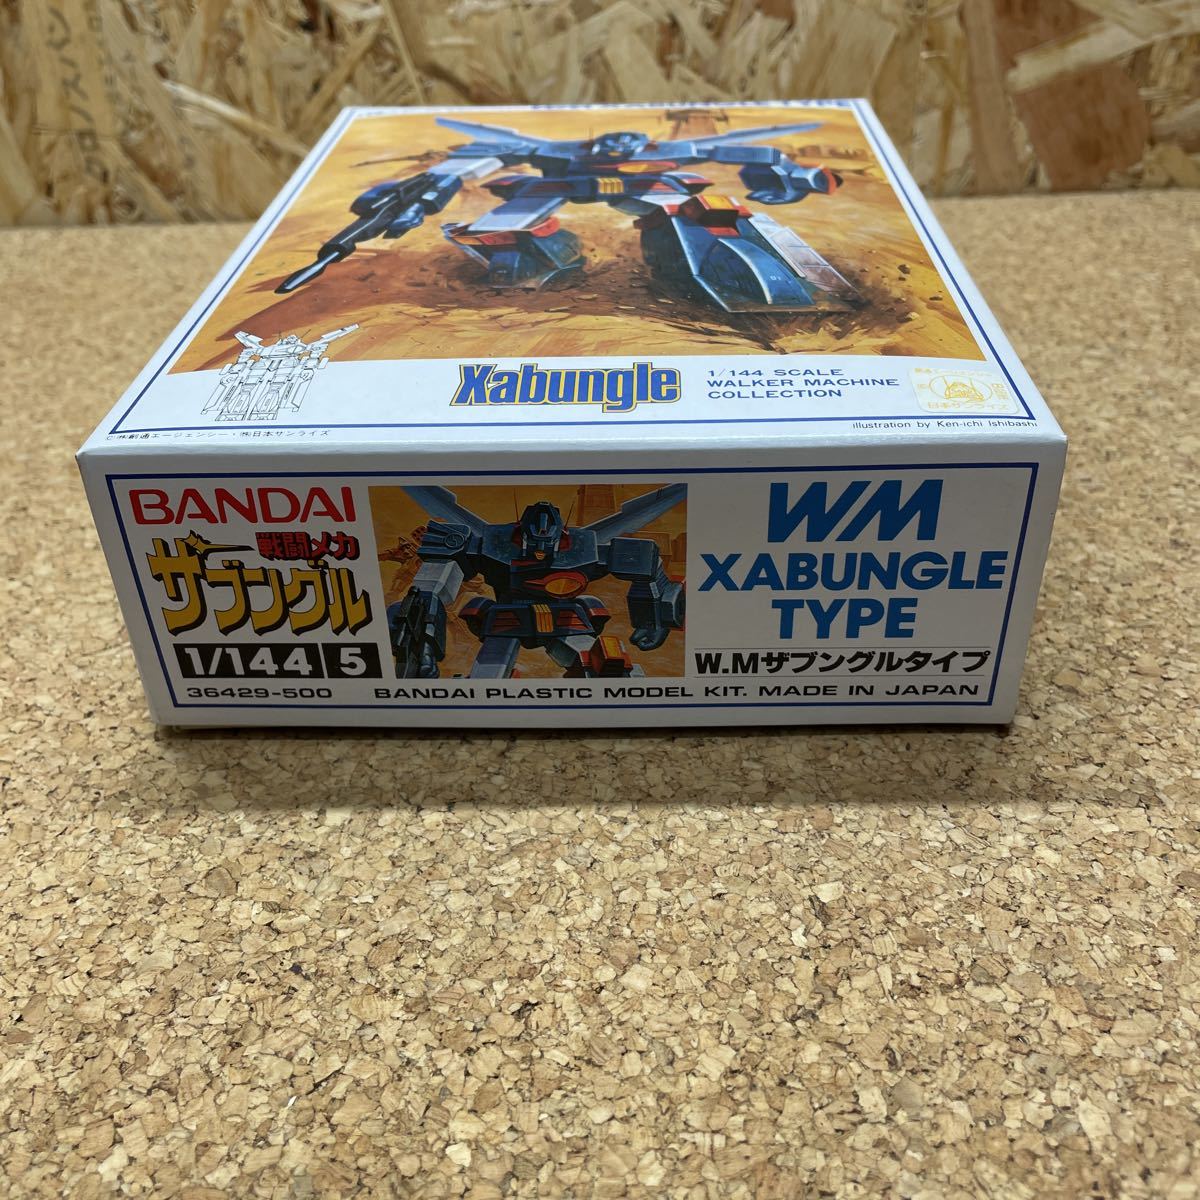 68 Bandai Blue Gale Xabungle 1/144 The bngru type instructions lack of not yet constructed including in a package un- possible outside fixed form shipping 